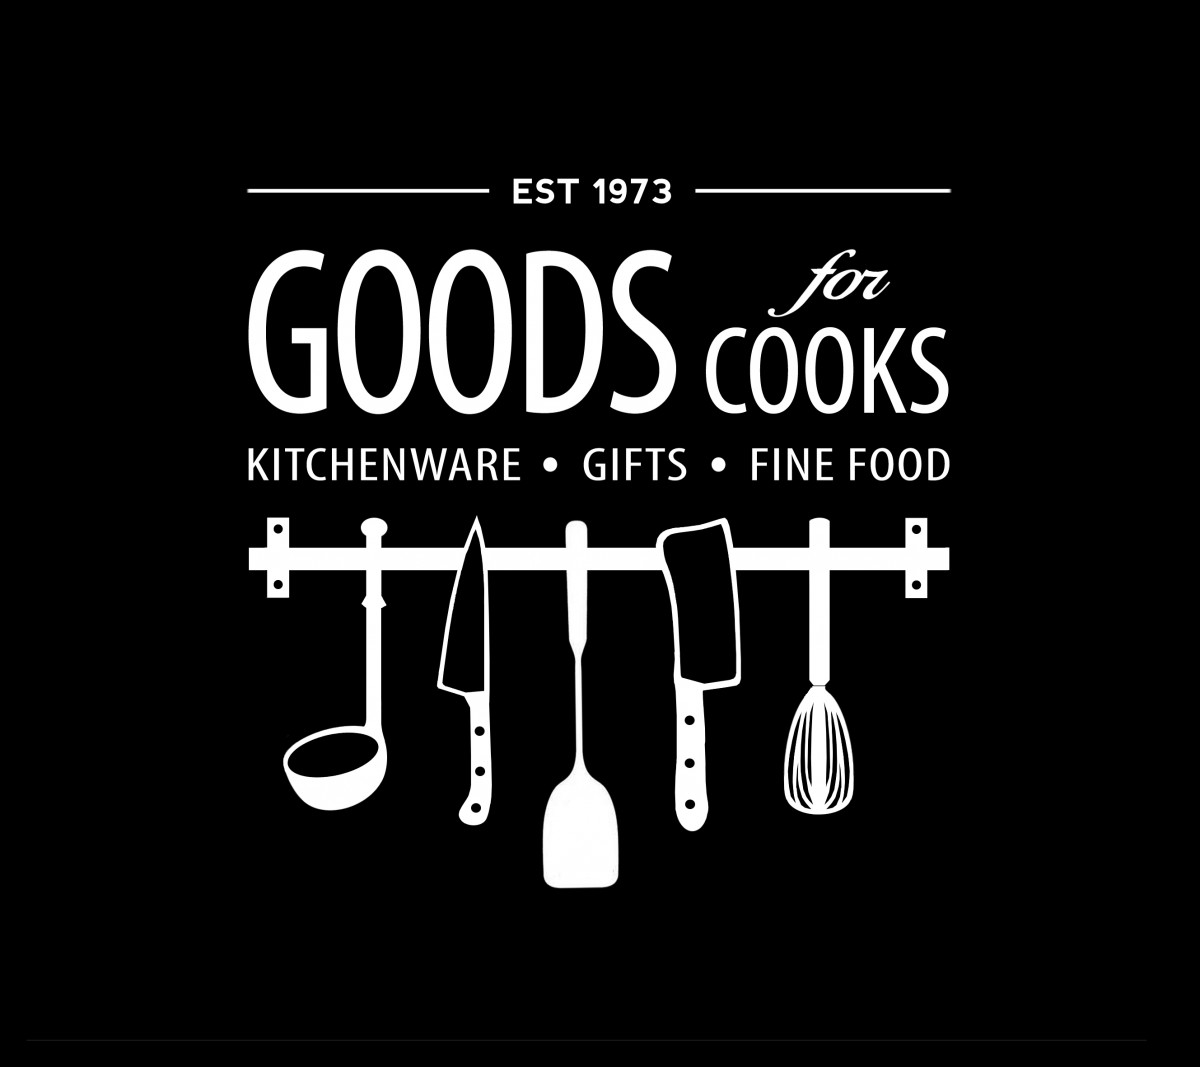 To cook good well. The good Cook. Cooking good Family reason.